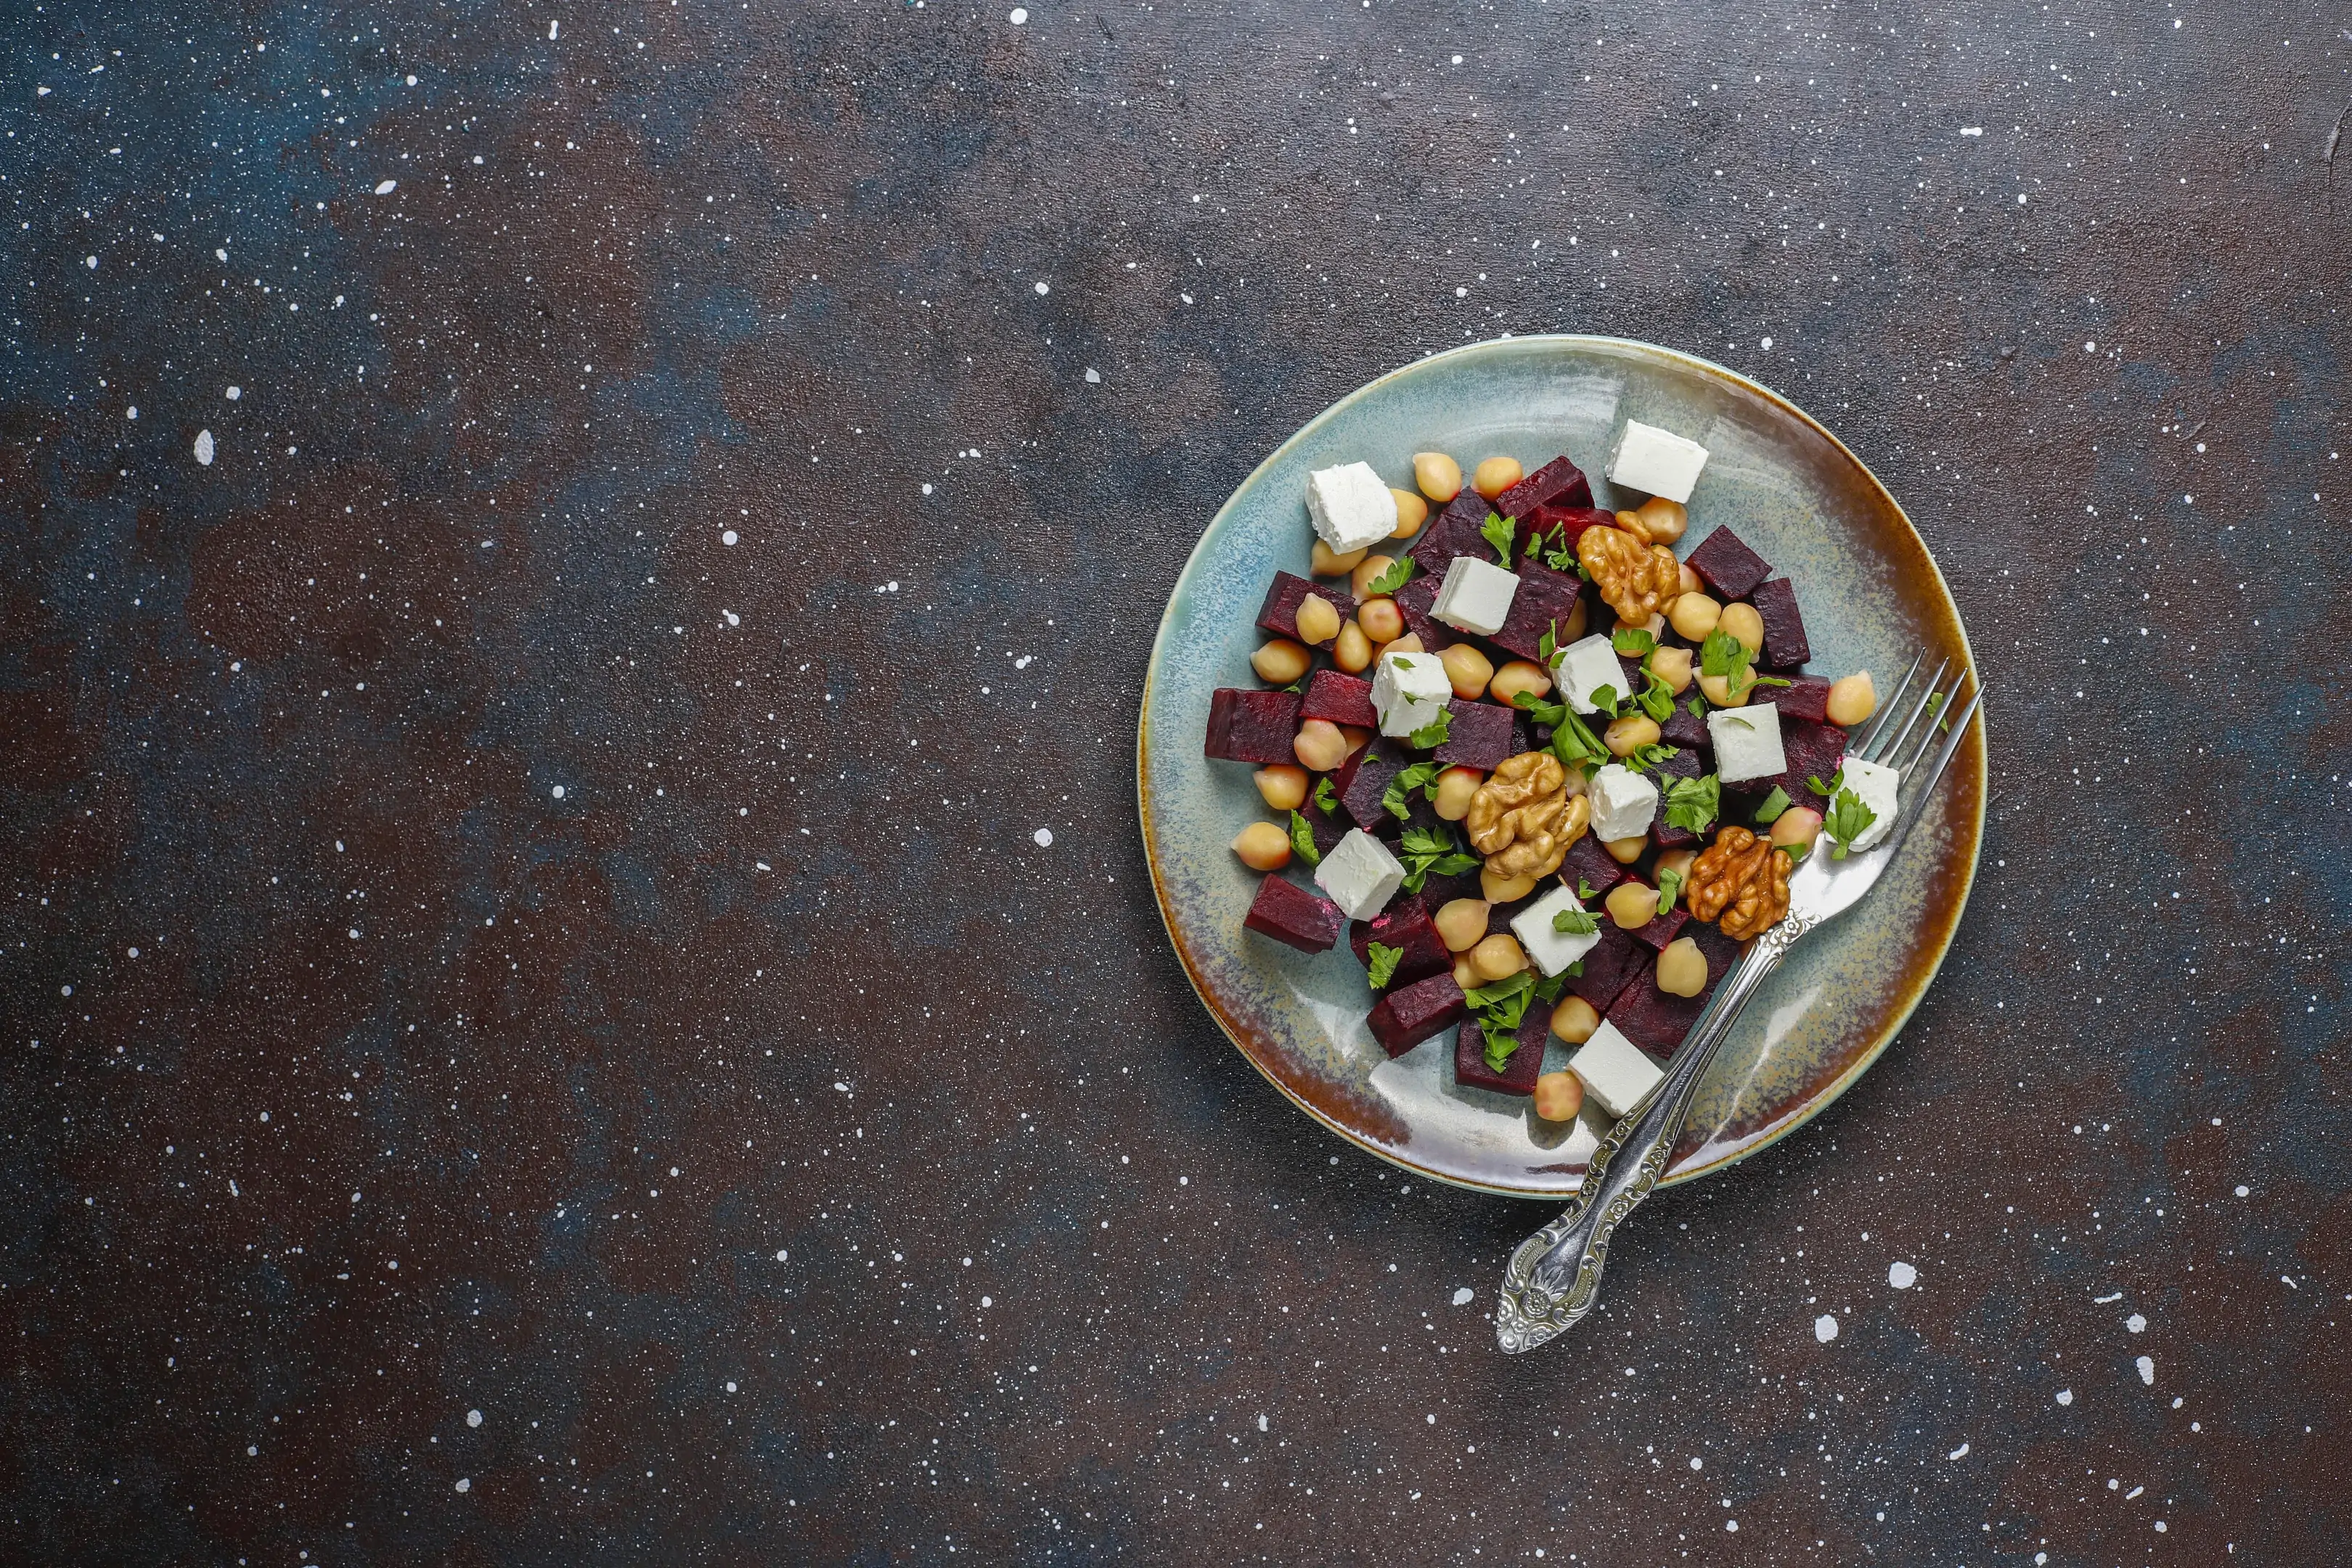 Beet salad with goat cheese and chickpeas